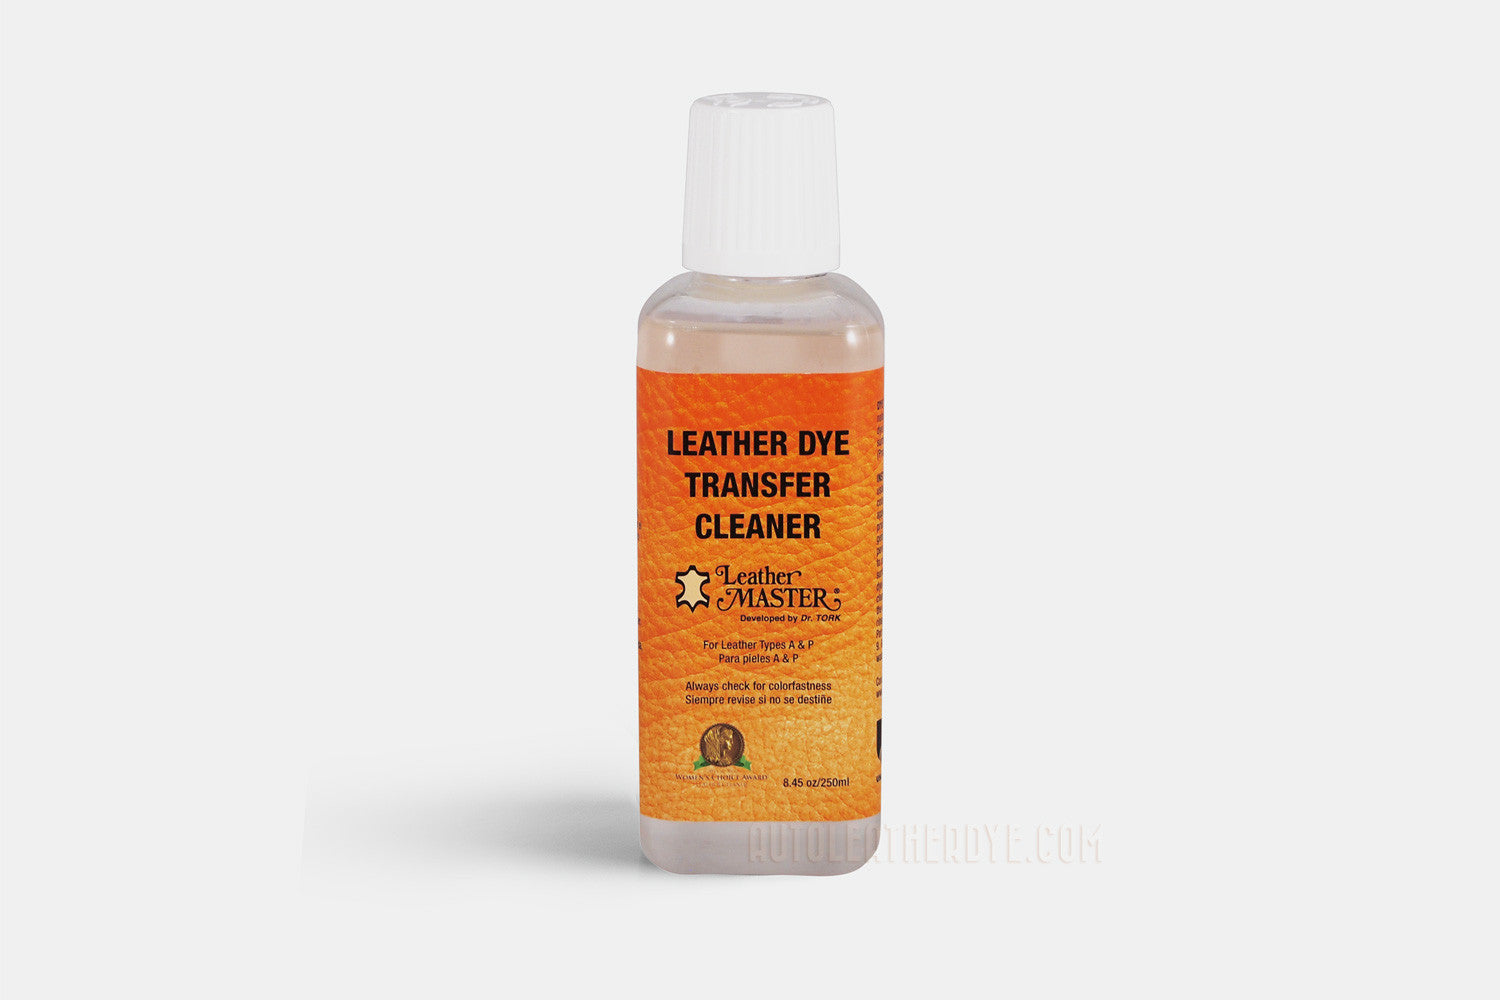 Leather Stain Remover - Removes Dye Transfer & Stains